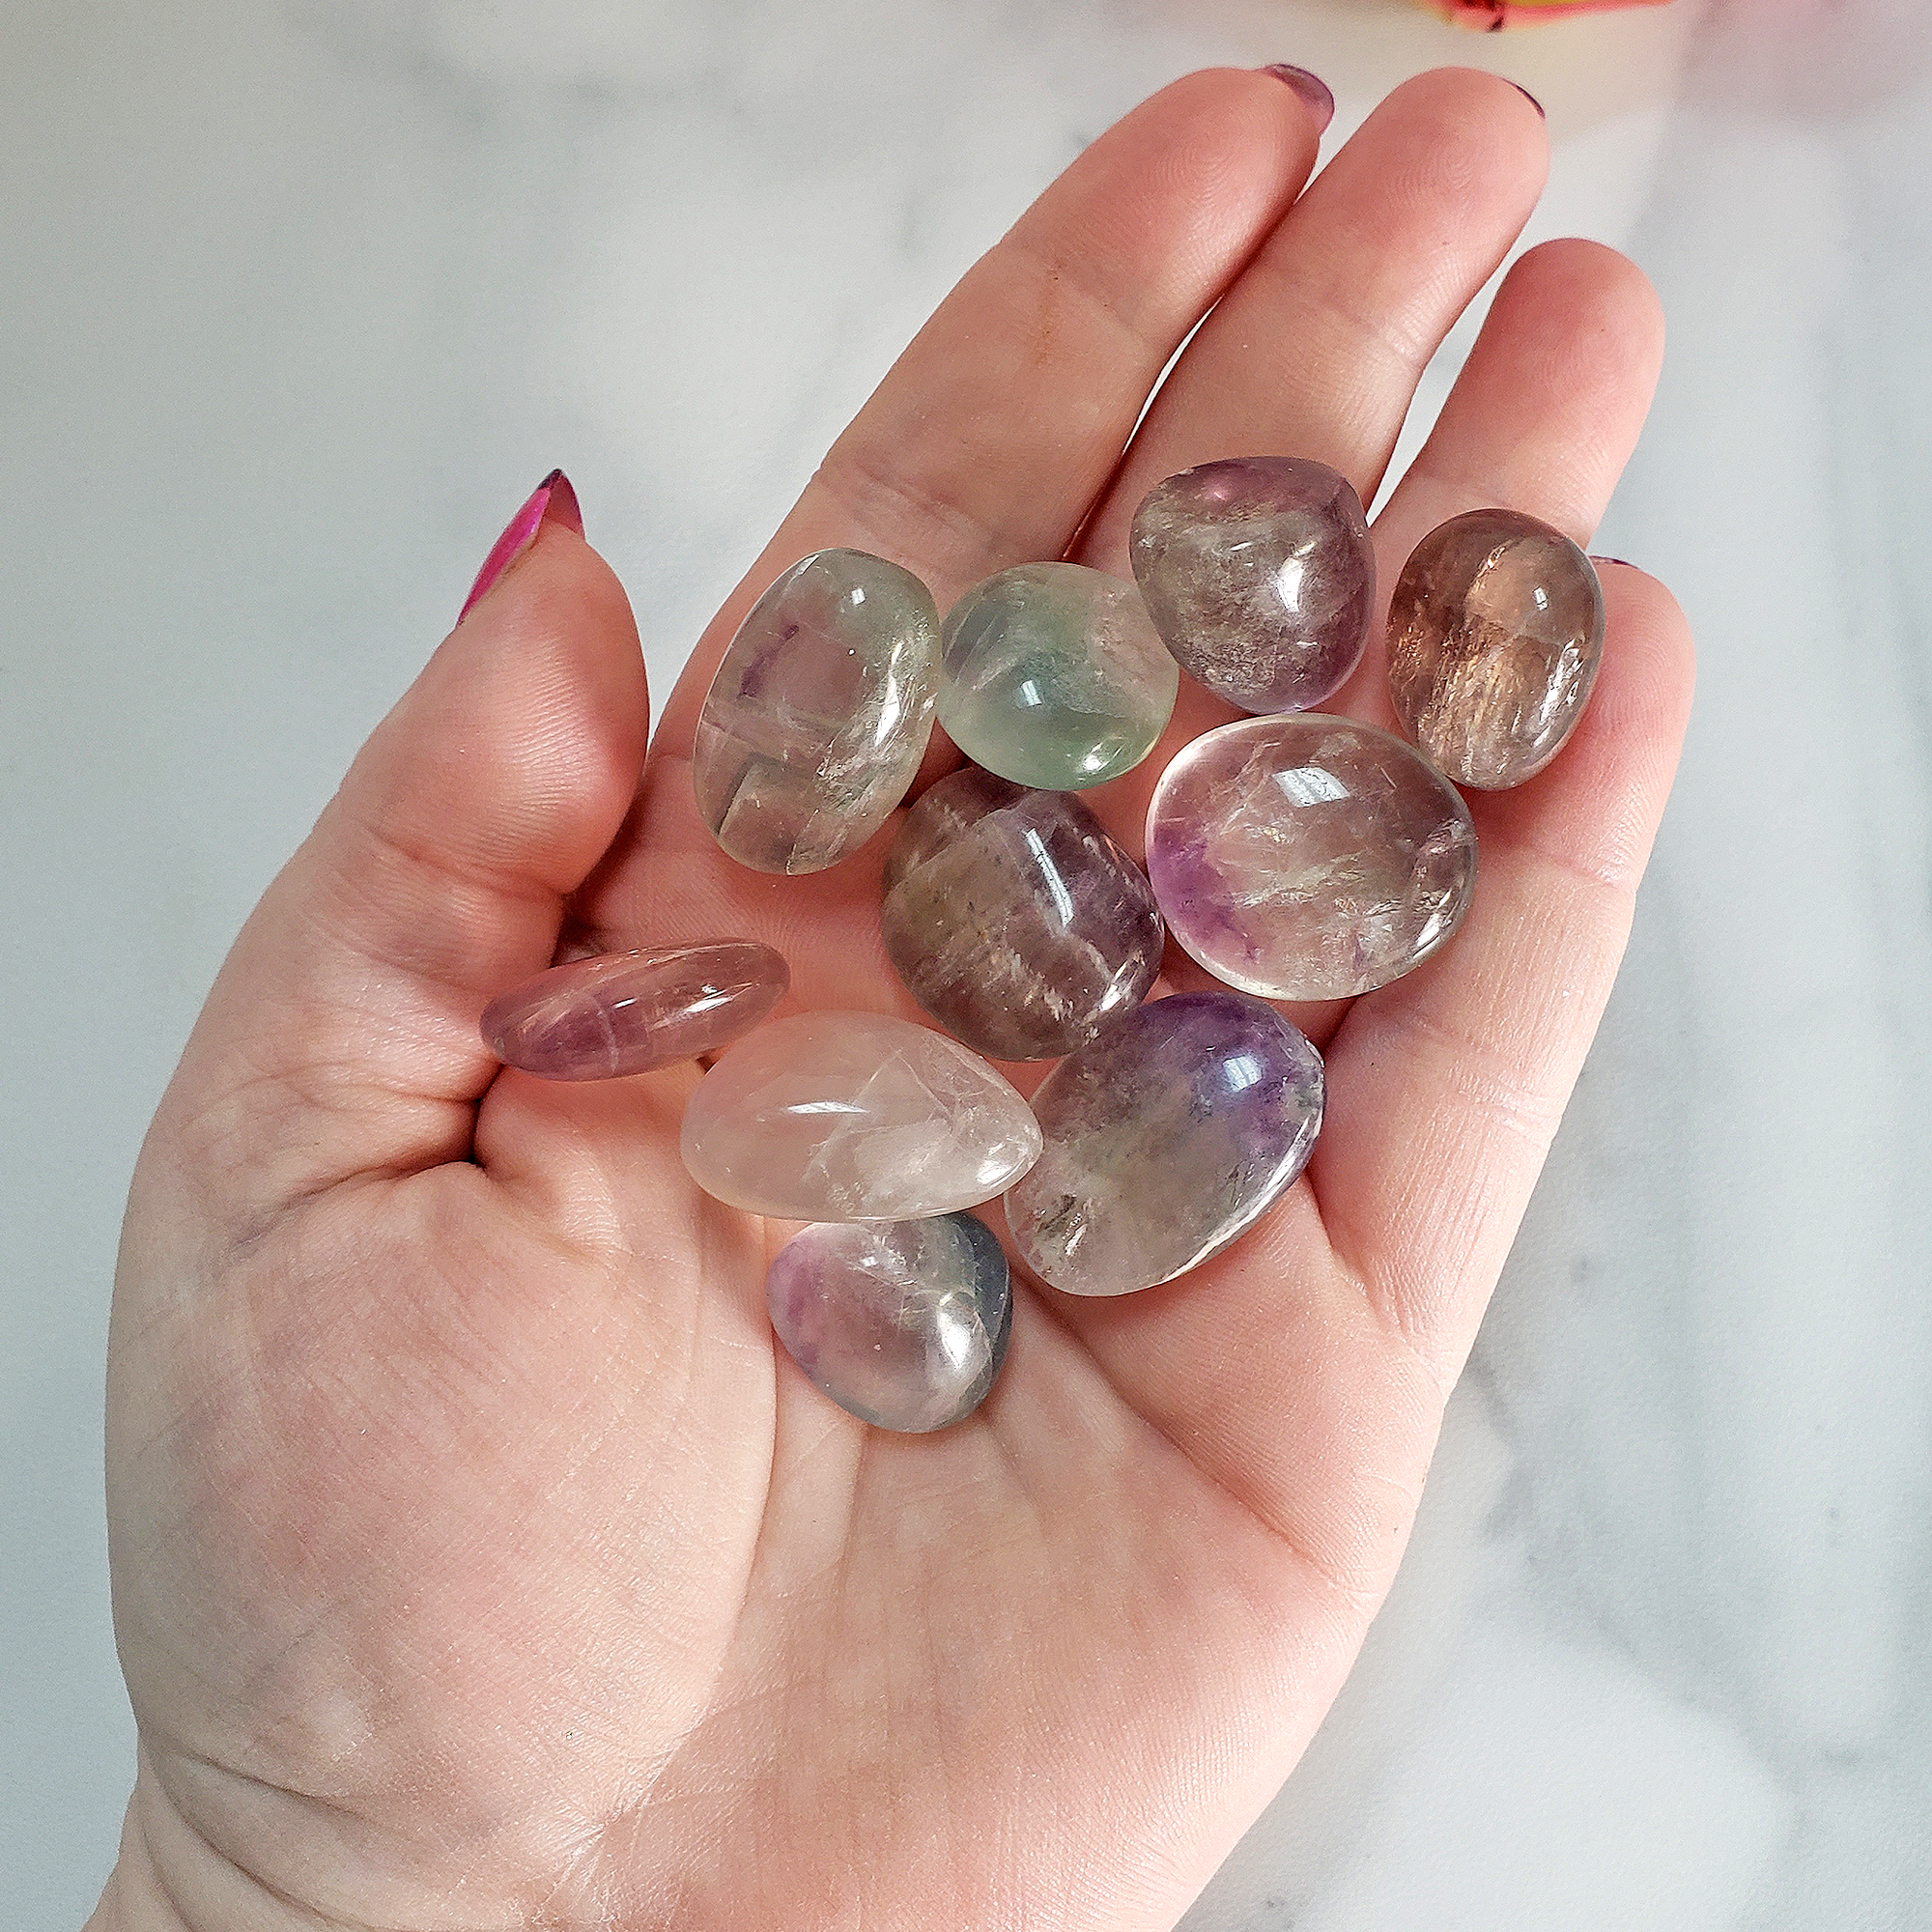 Ghost Pale Fluorite Crystal Natural Gemstone Tumbled Stone - Handful